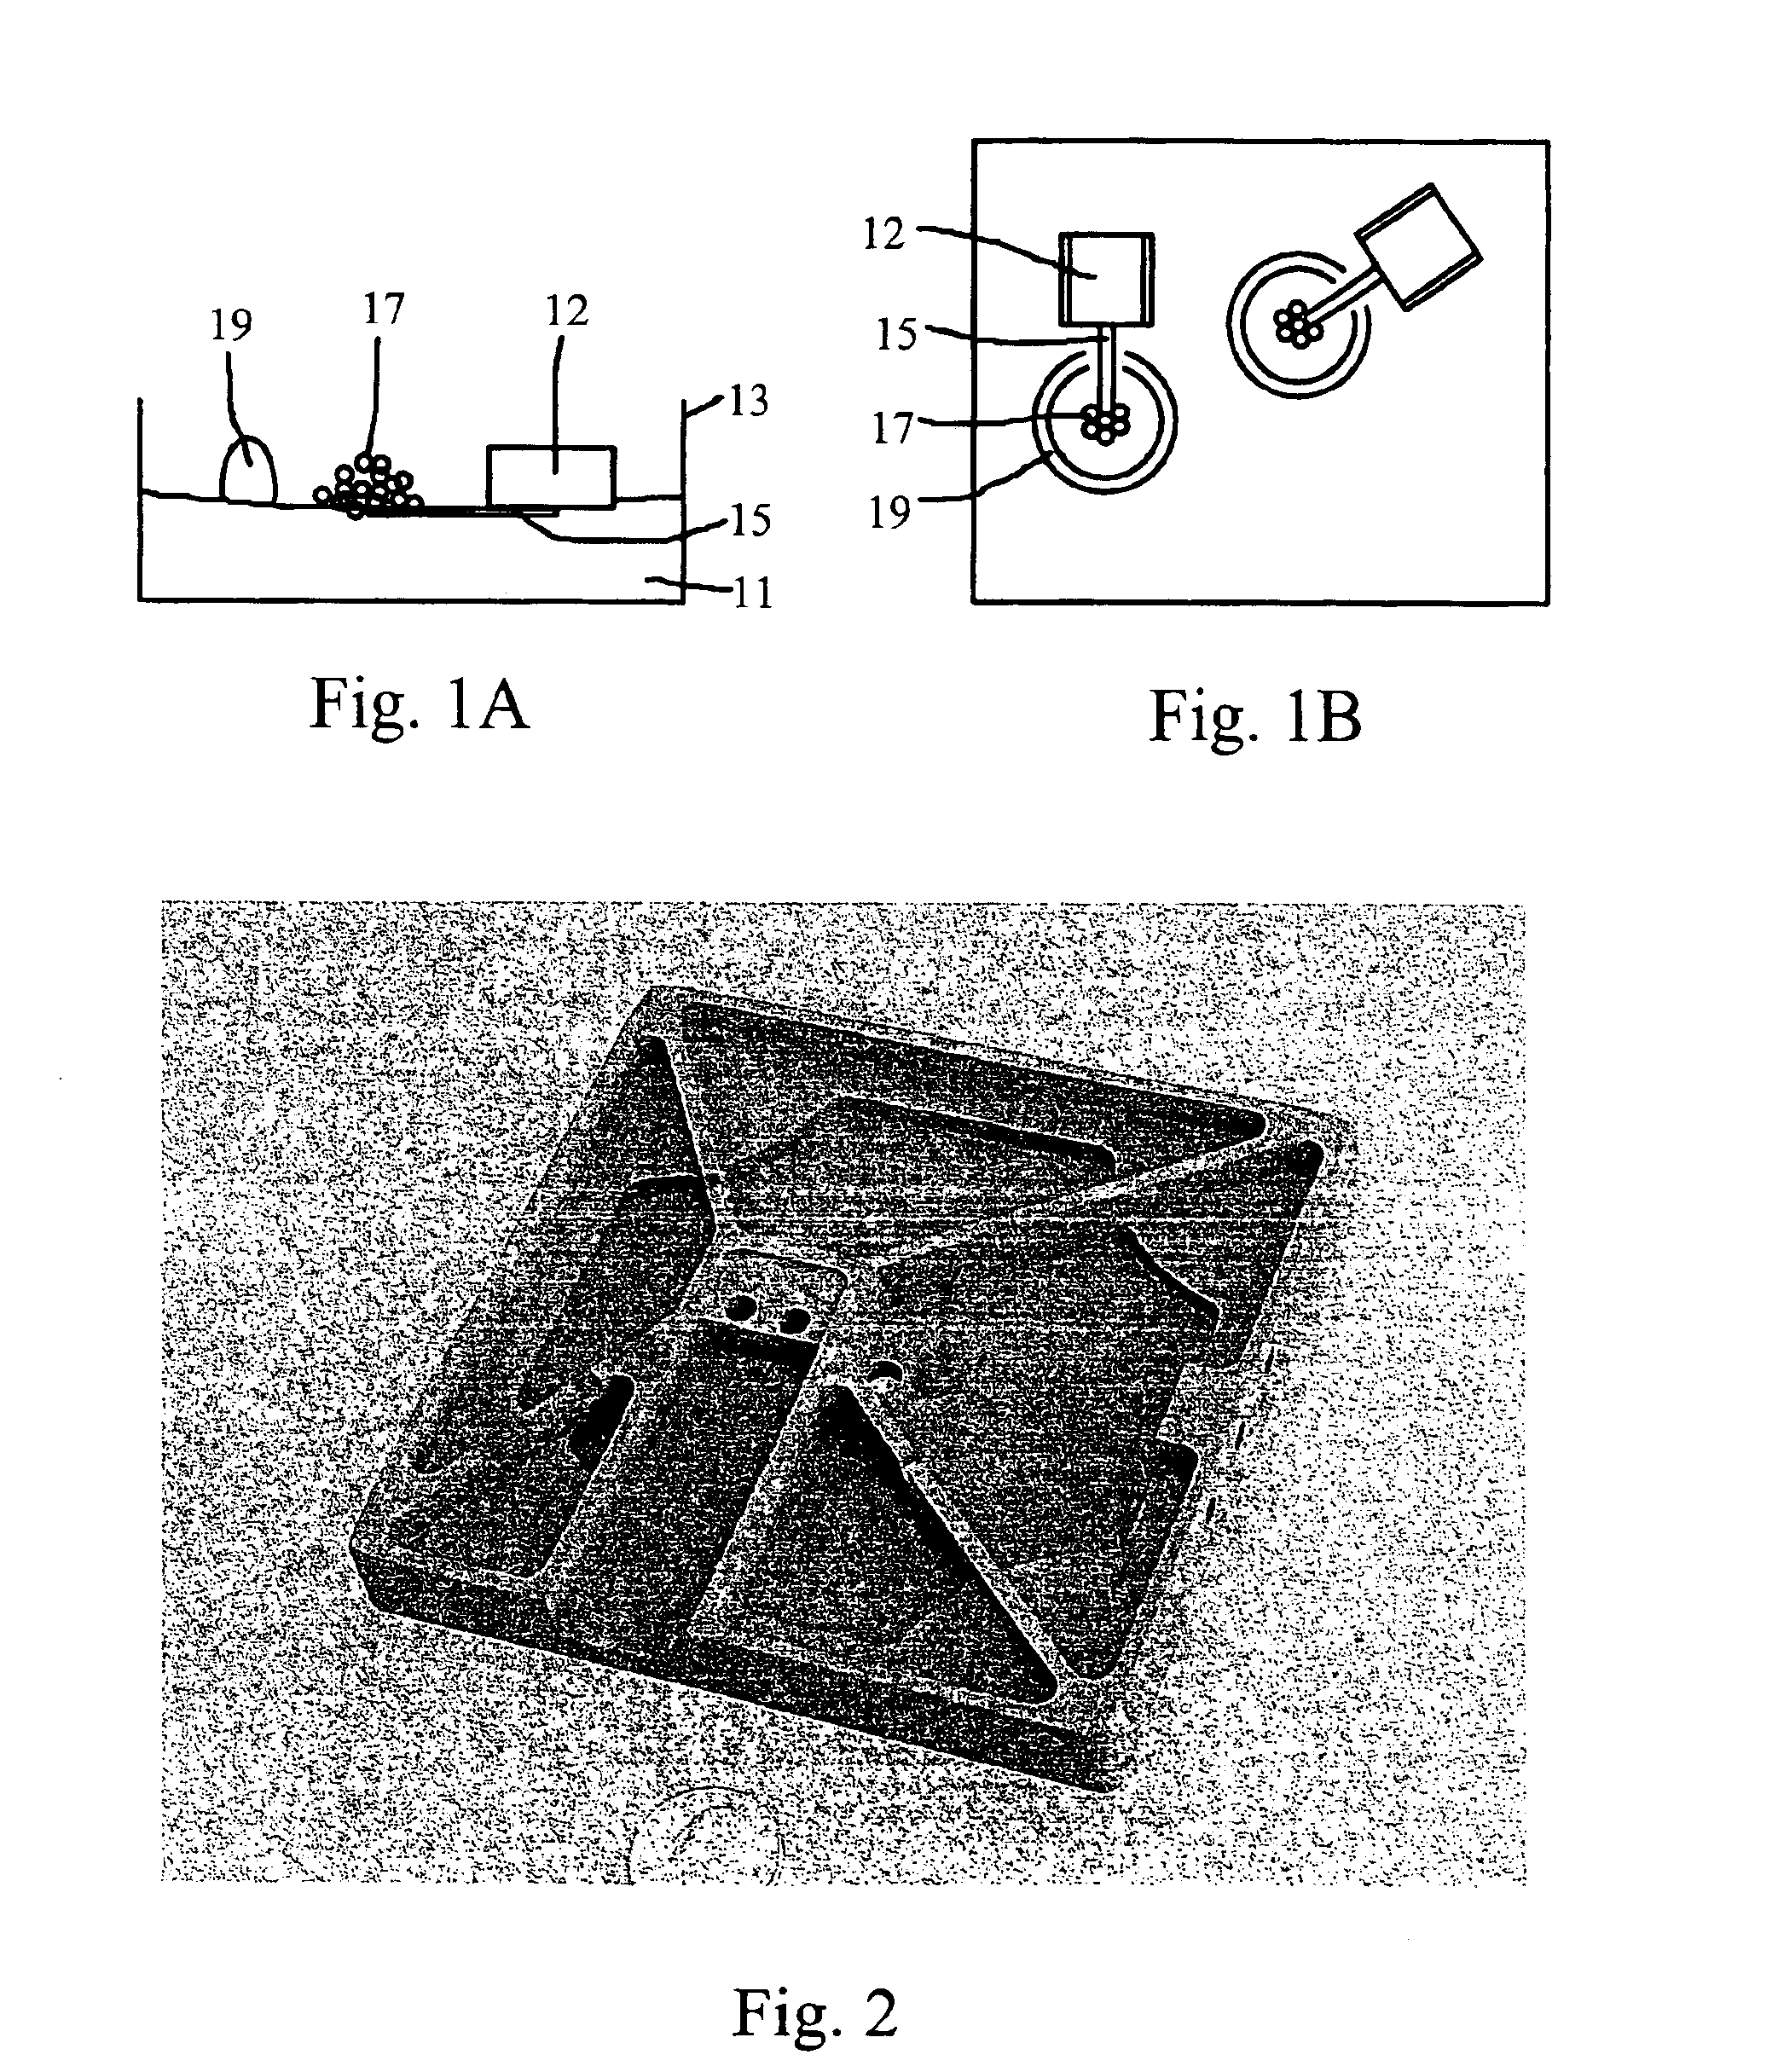 Silicon carbide composites, and methods for making same